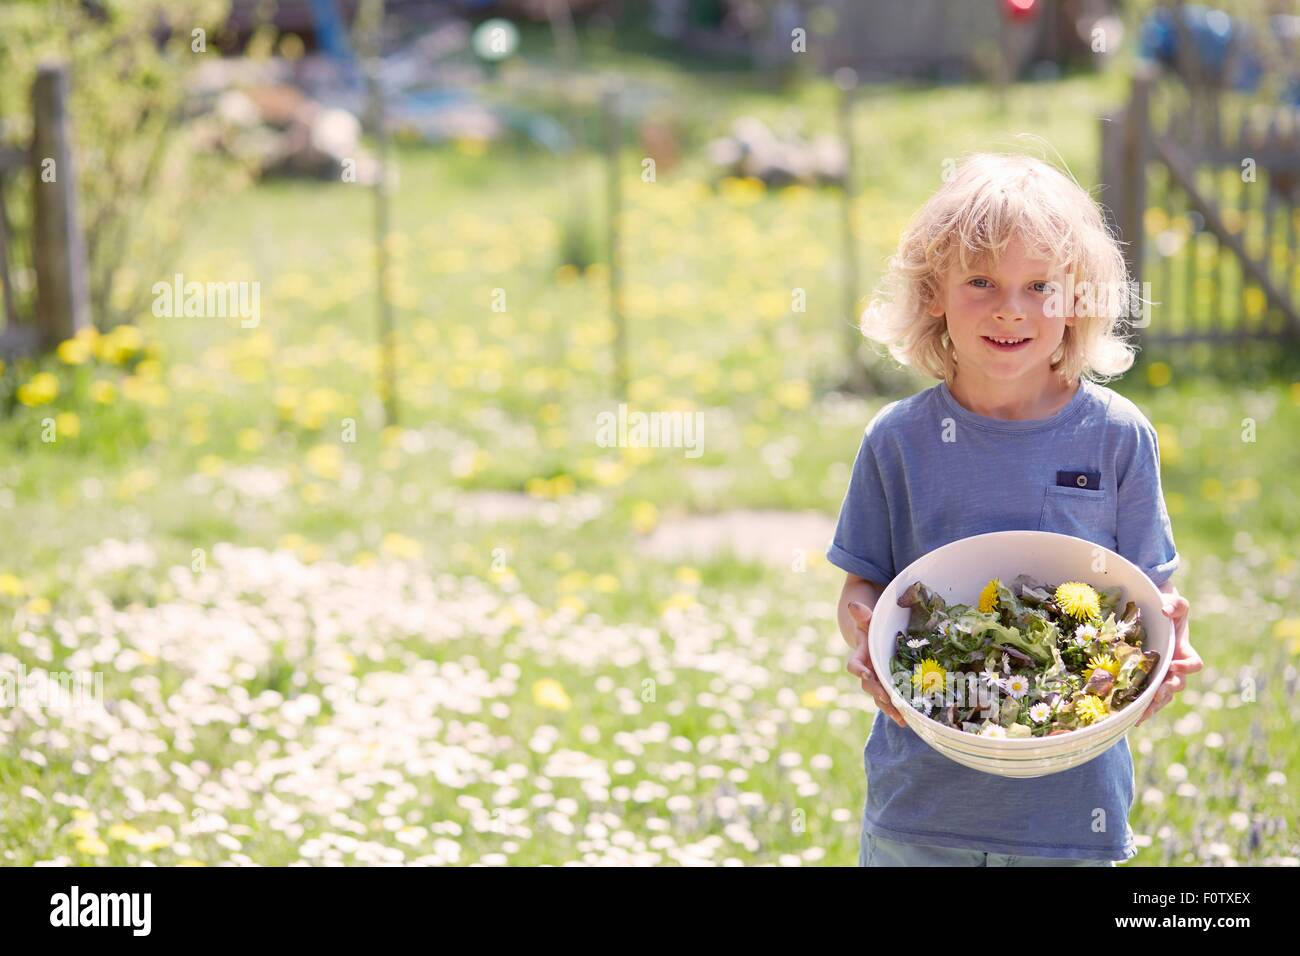 Portrait of young boy holding bowl of garden herbs Stock Photo